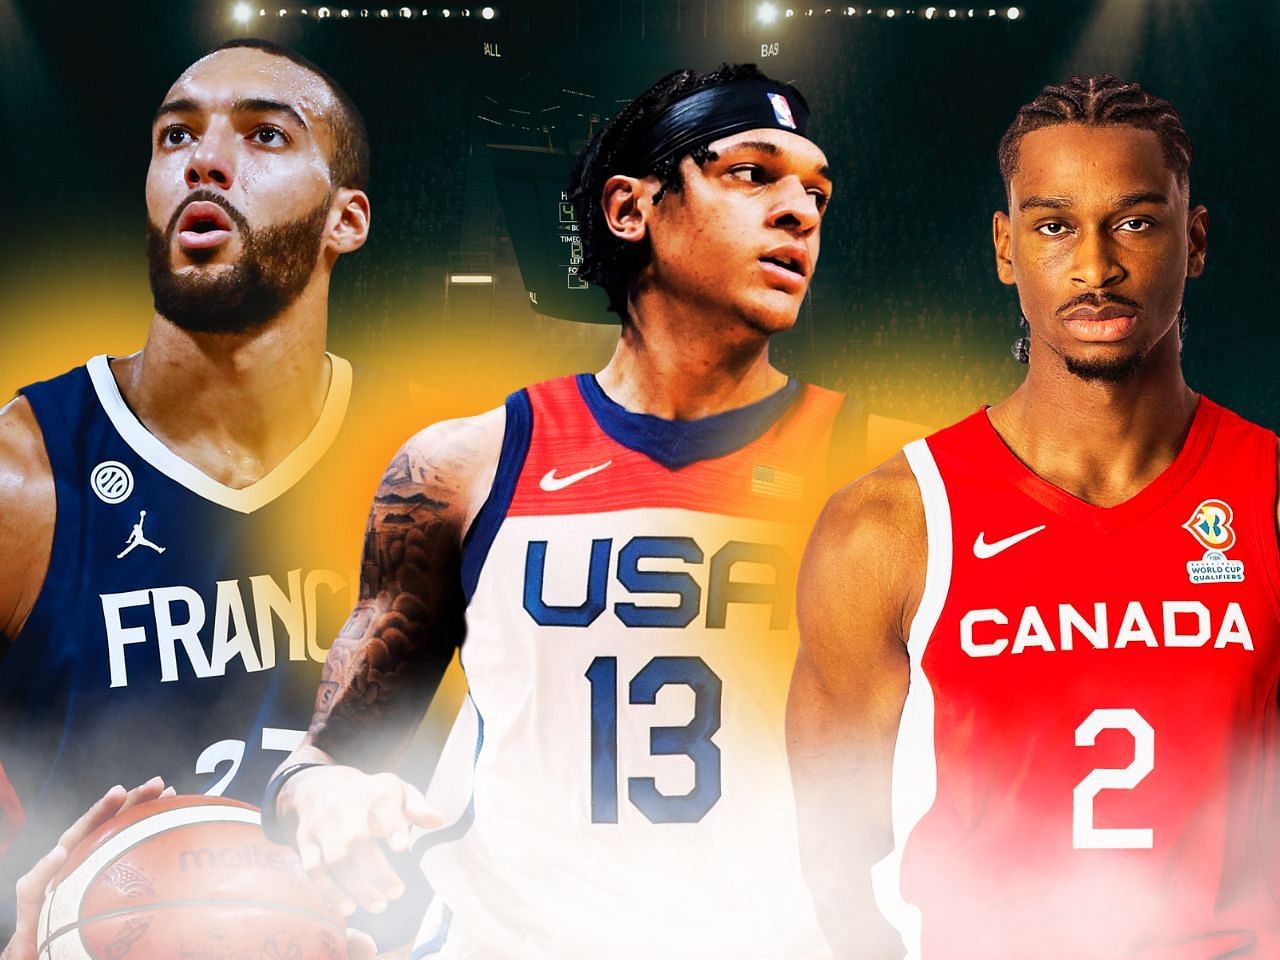 List of all NBA players participating in FIBA Basketball World Cup 2023